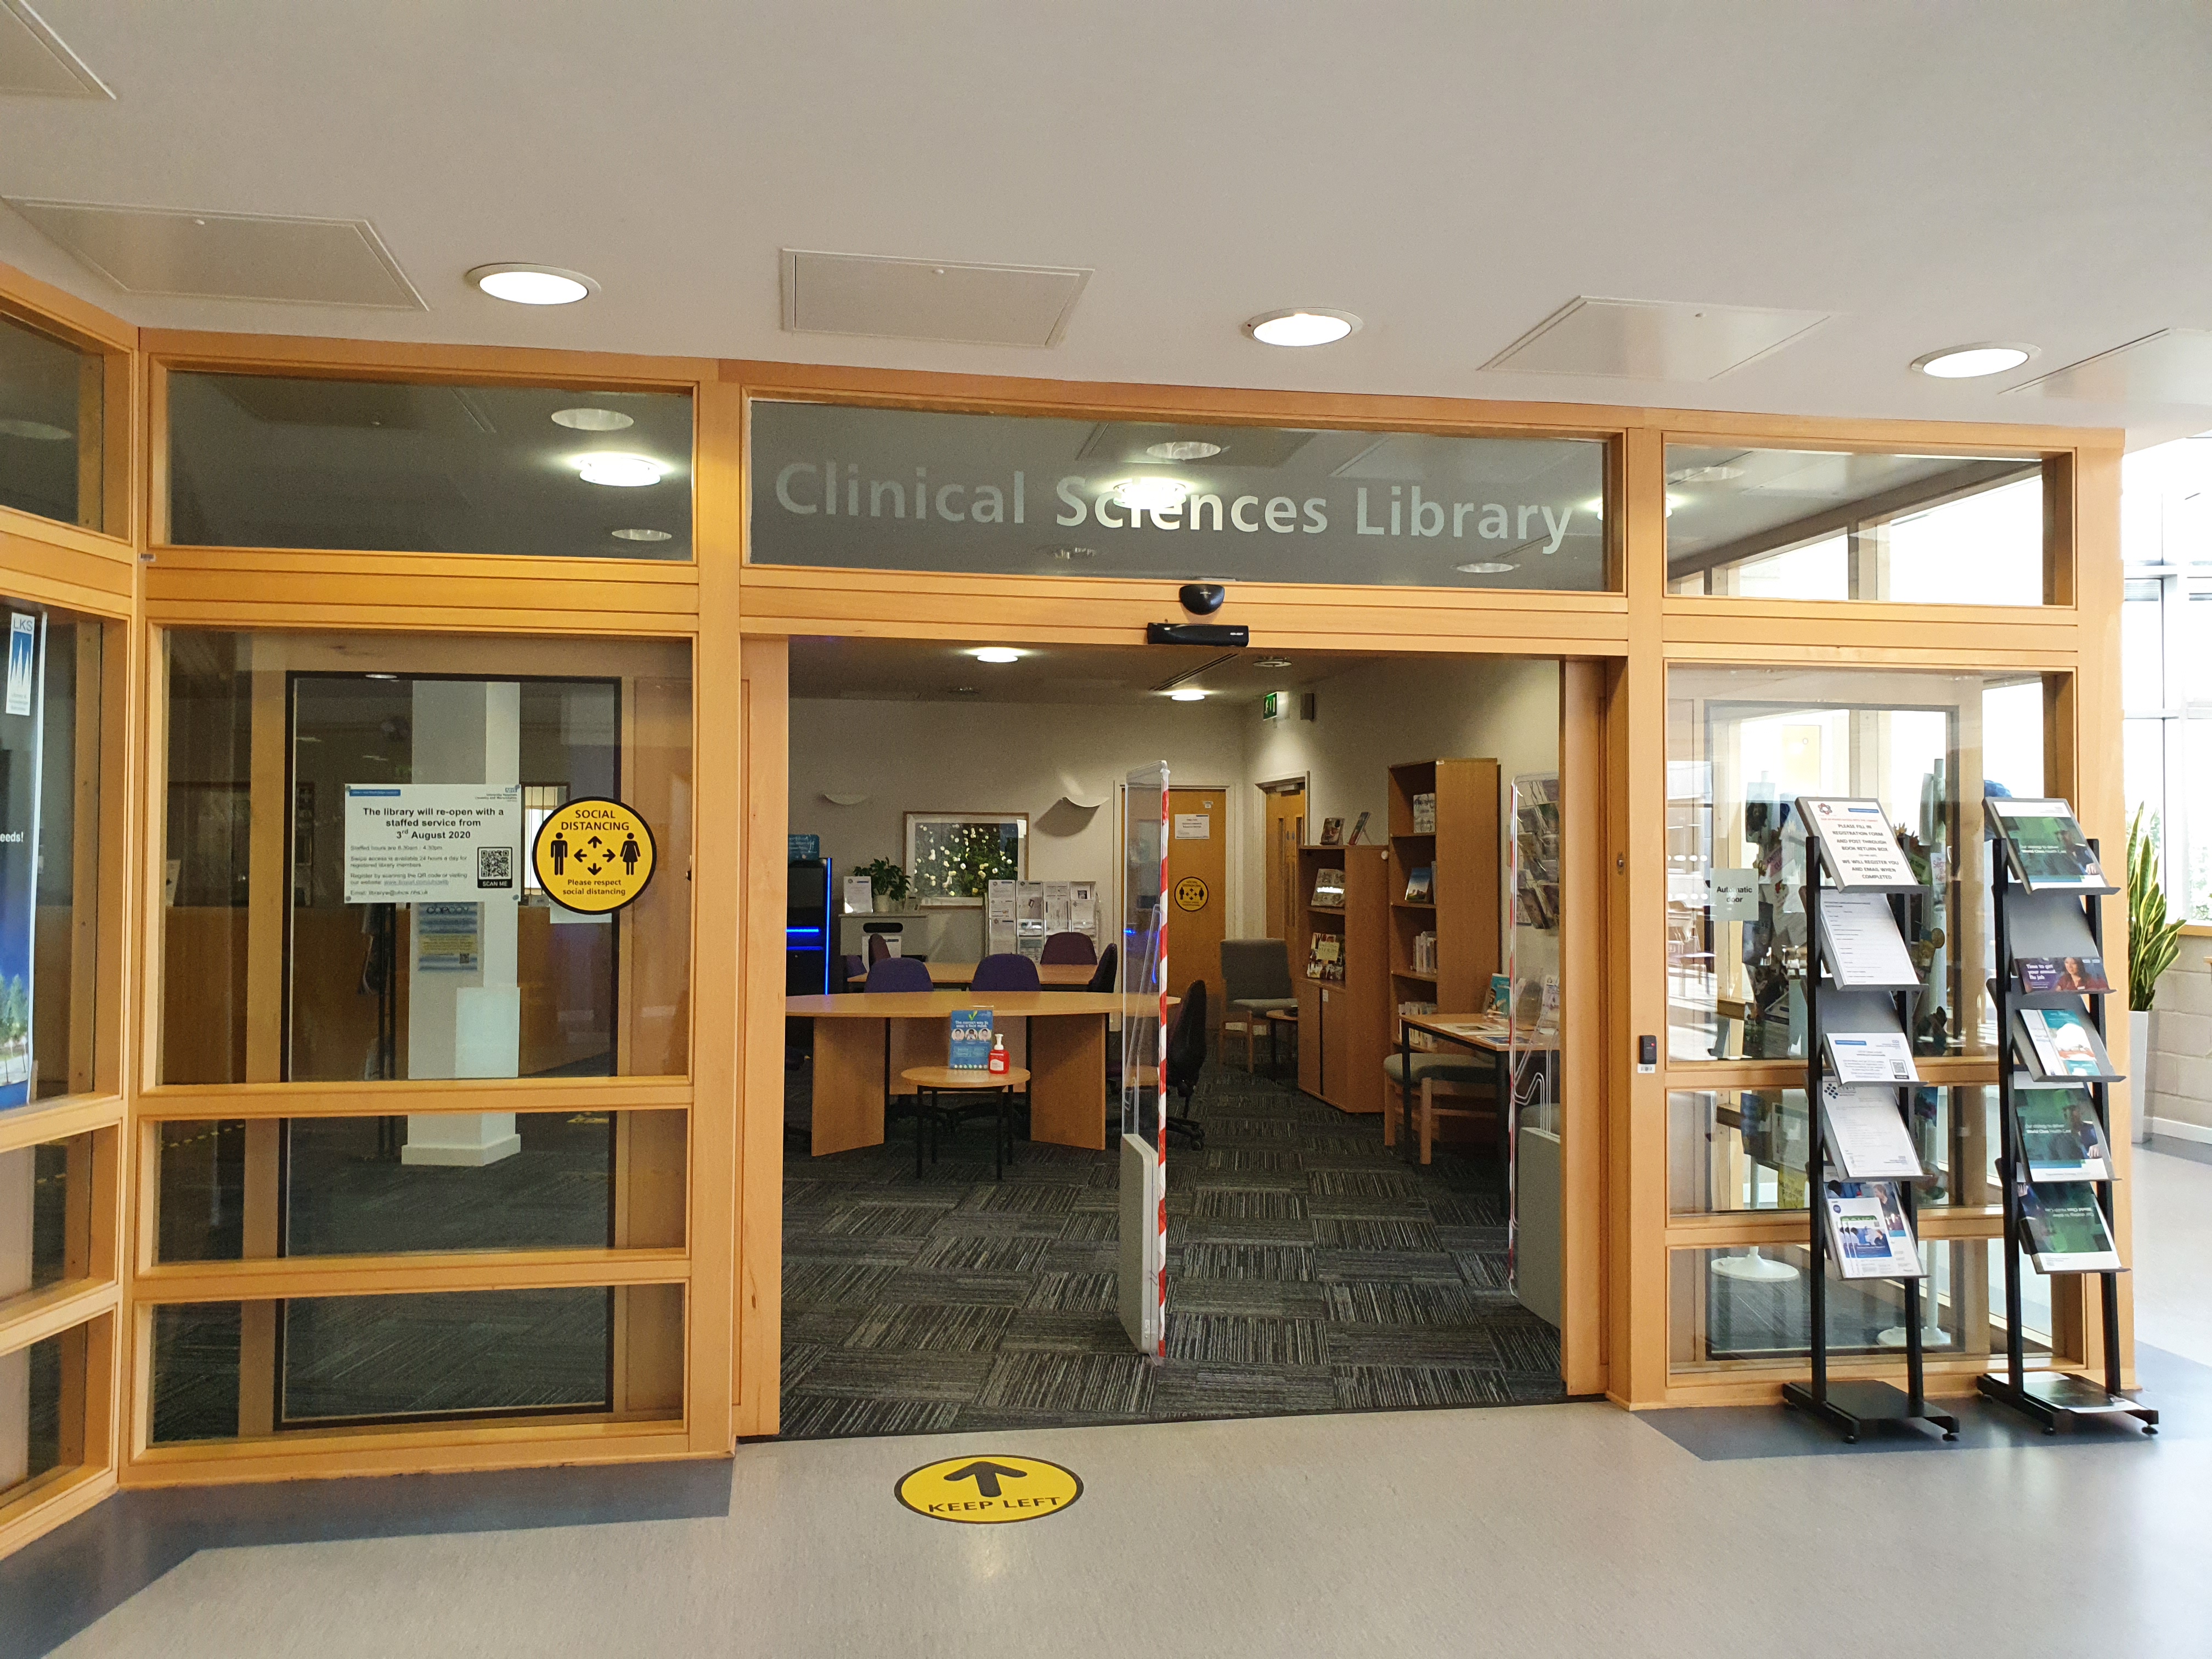 Image of the entrance to the library